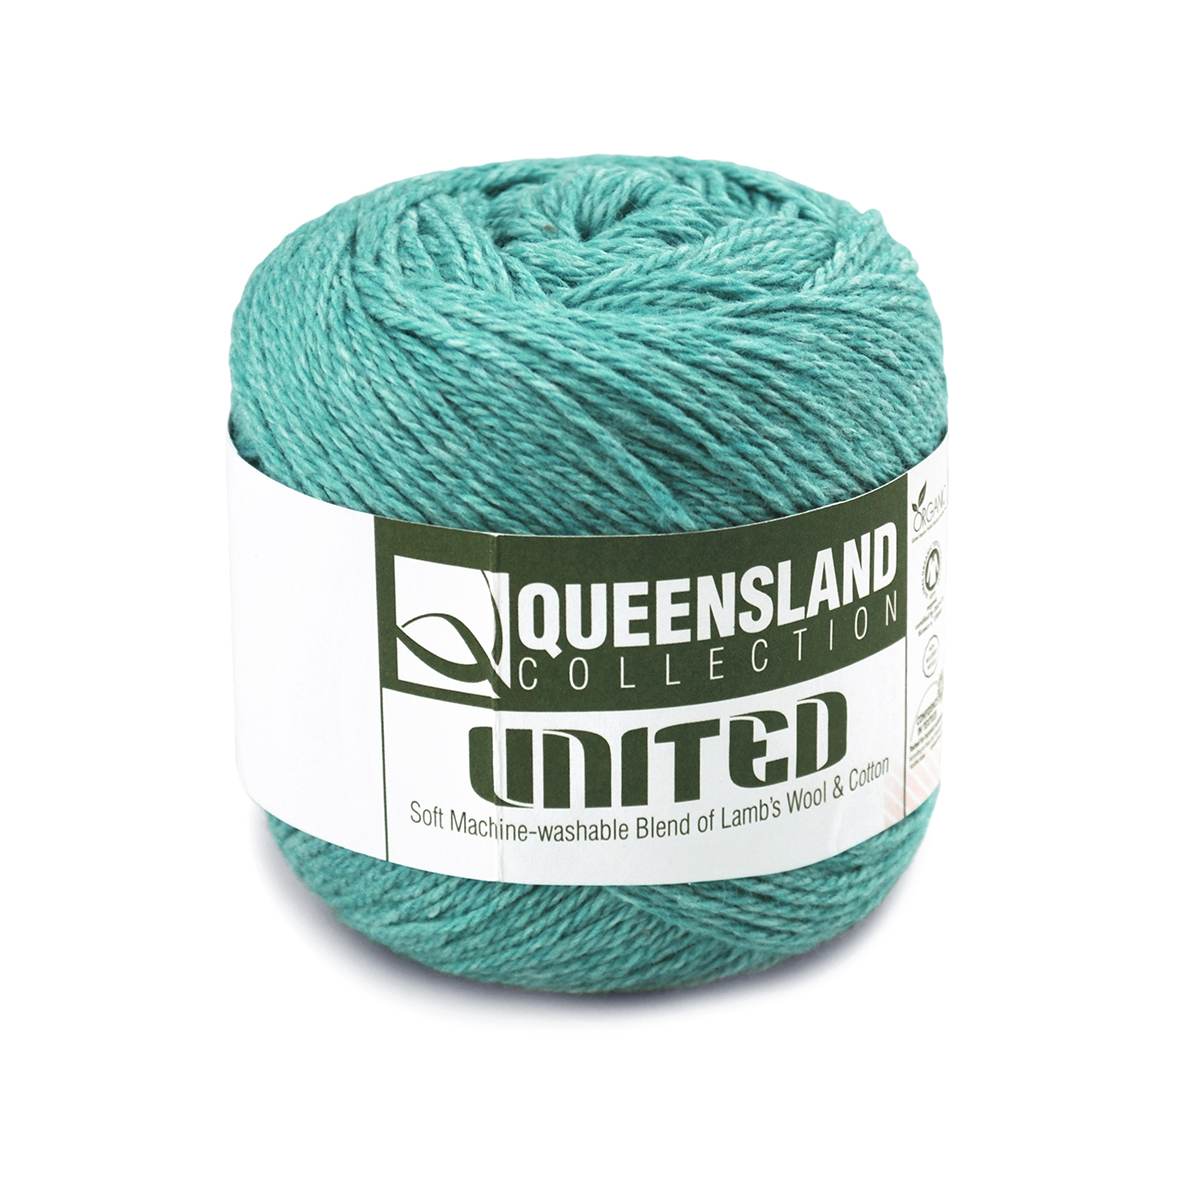 a skein of United